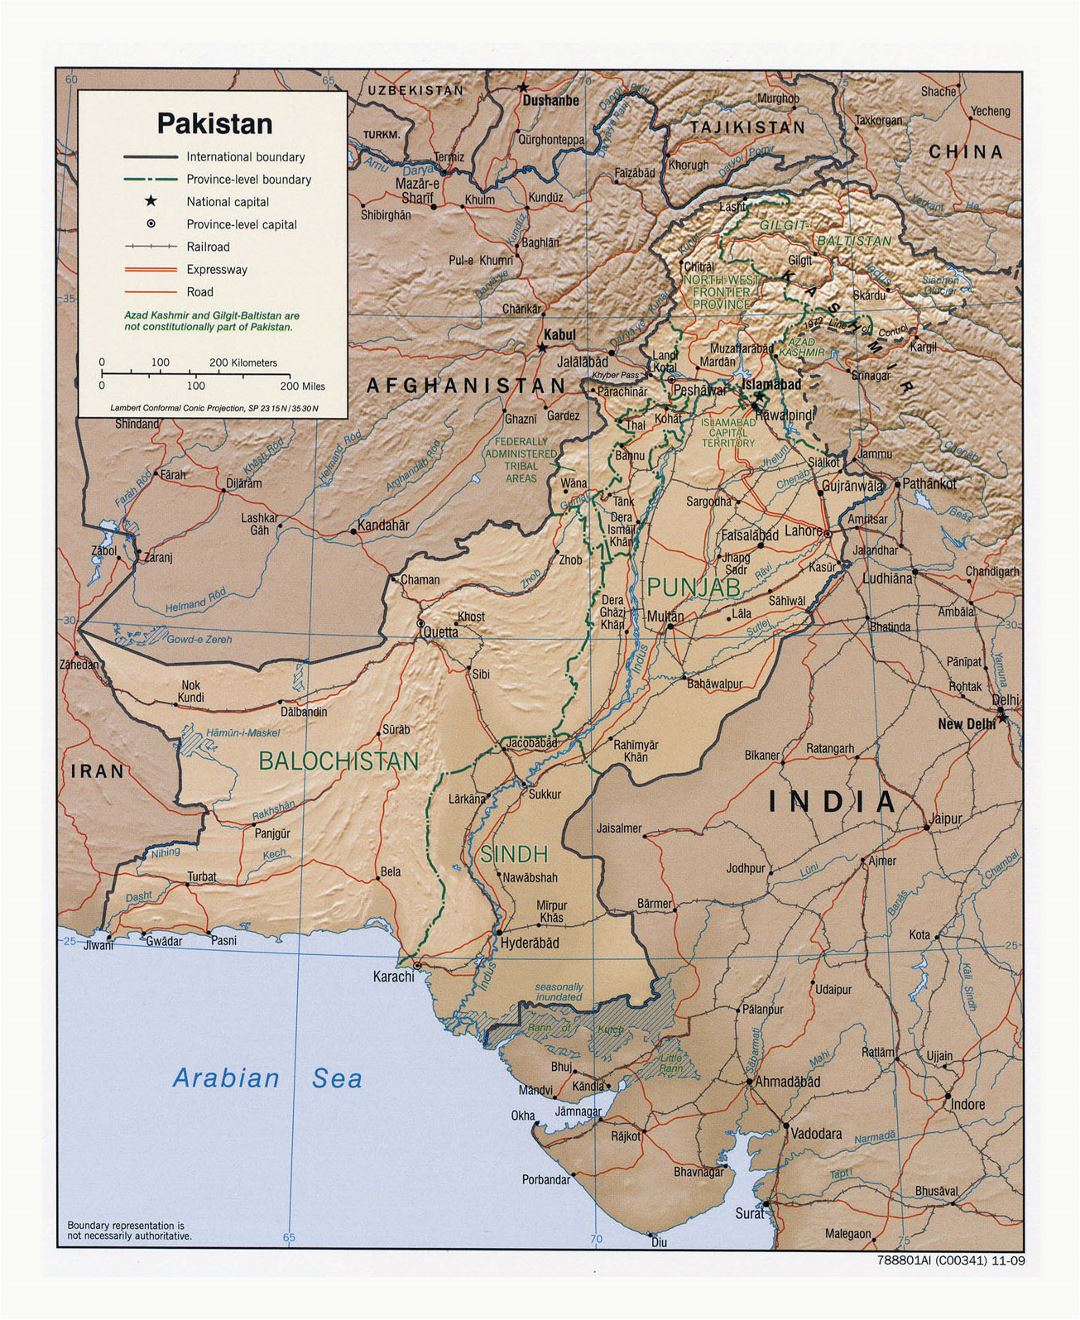 Detailed political and administrative map of Pakistan with relief, roads, railroads and major cities - 2009